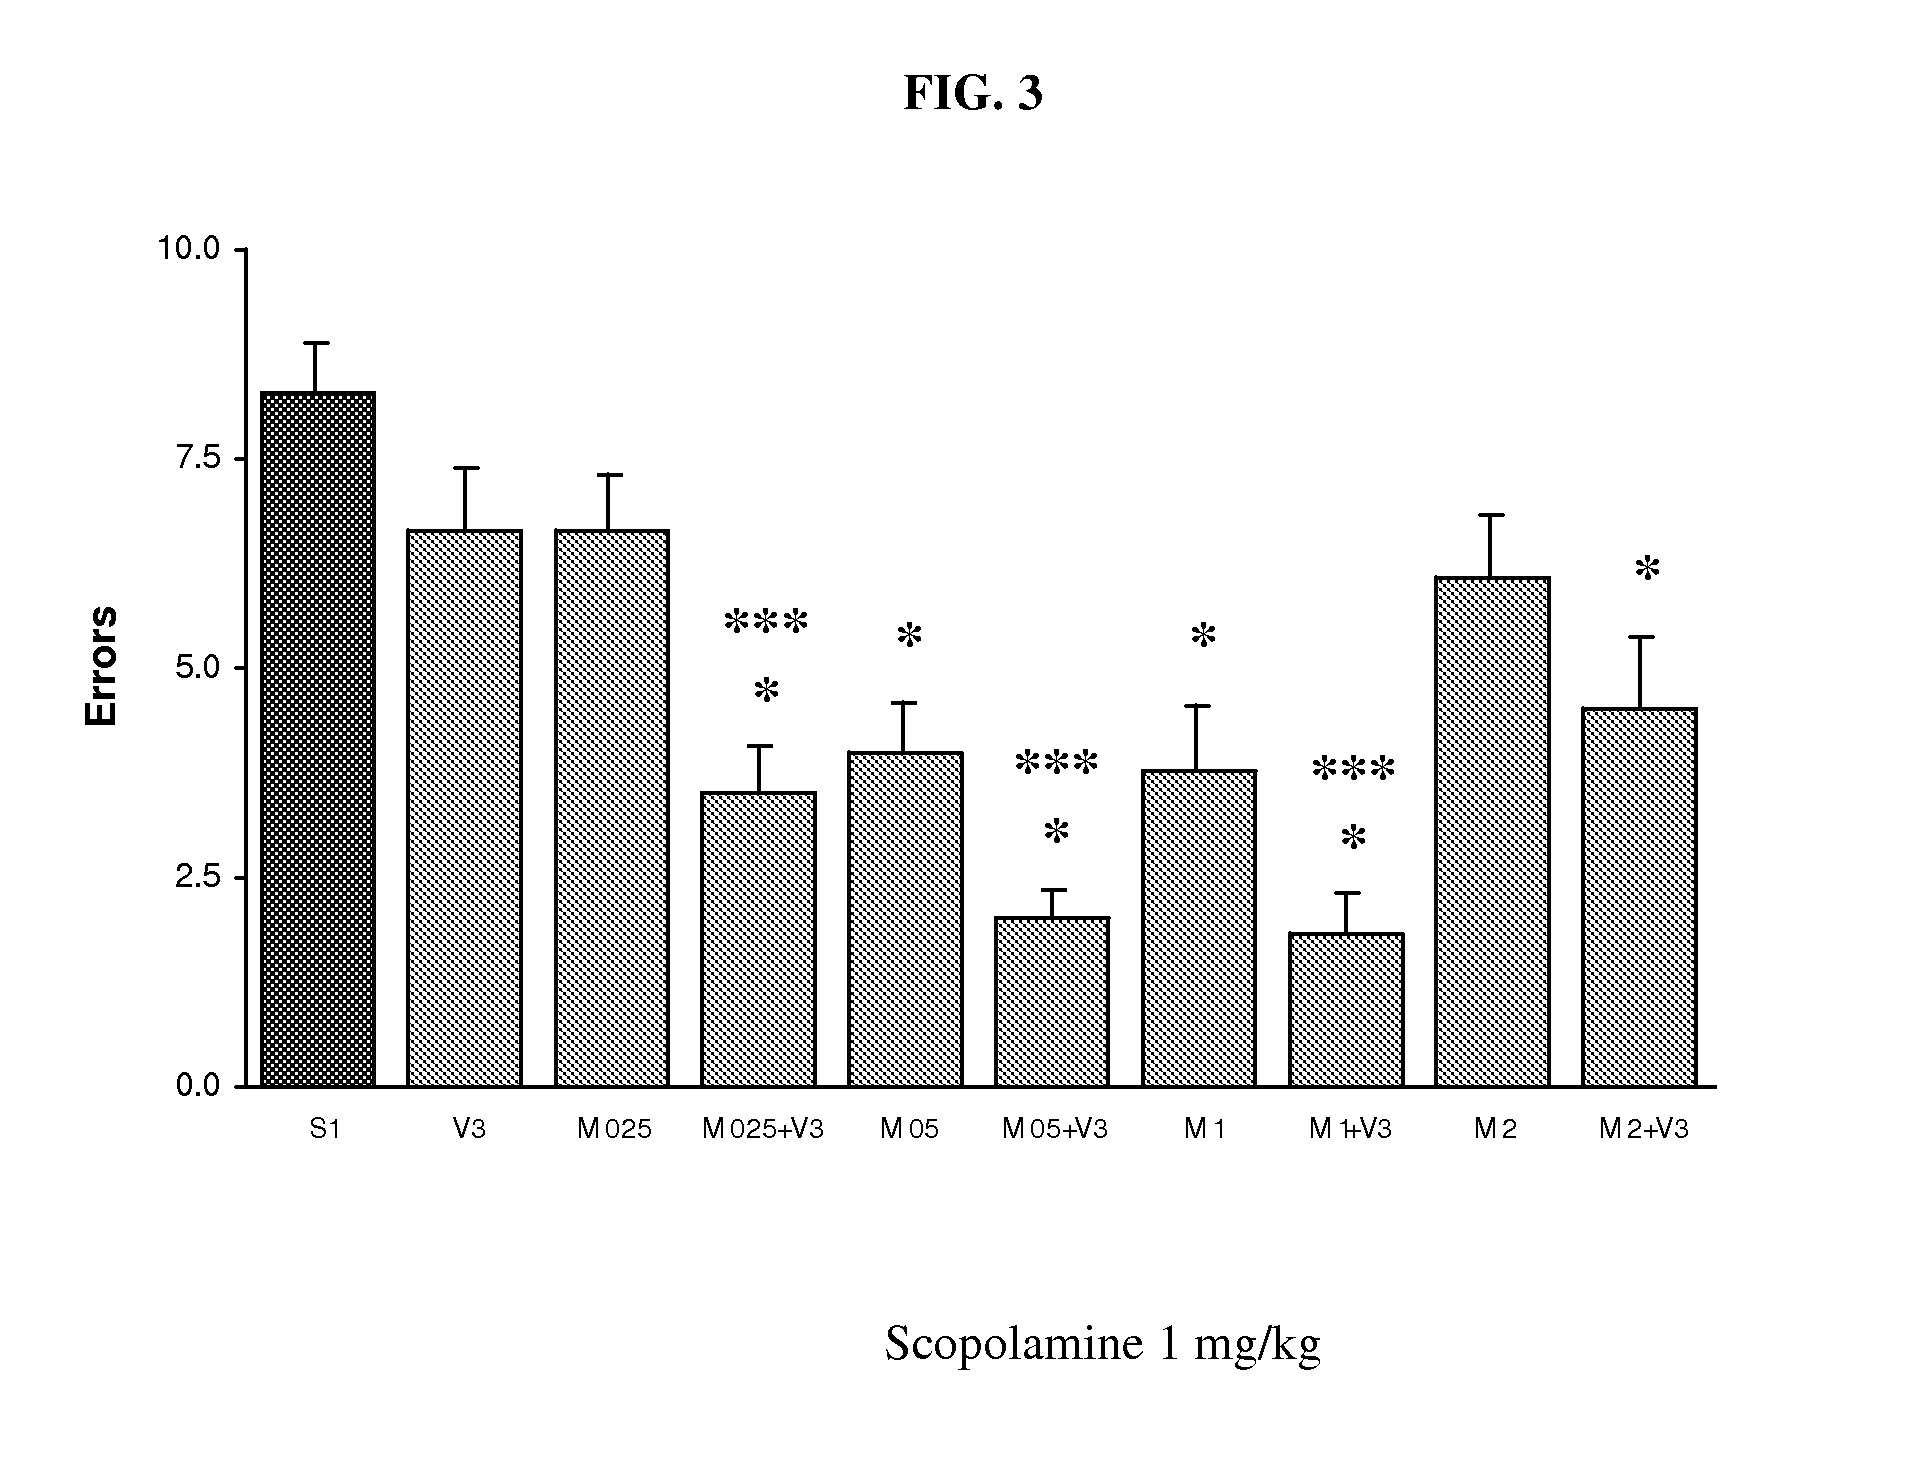 Delivery device containing venlafaxine and memantine and method of use thereof